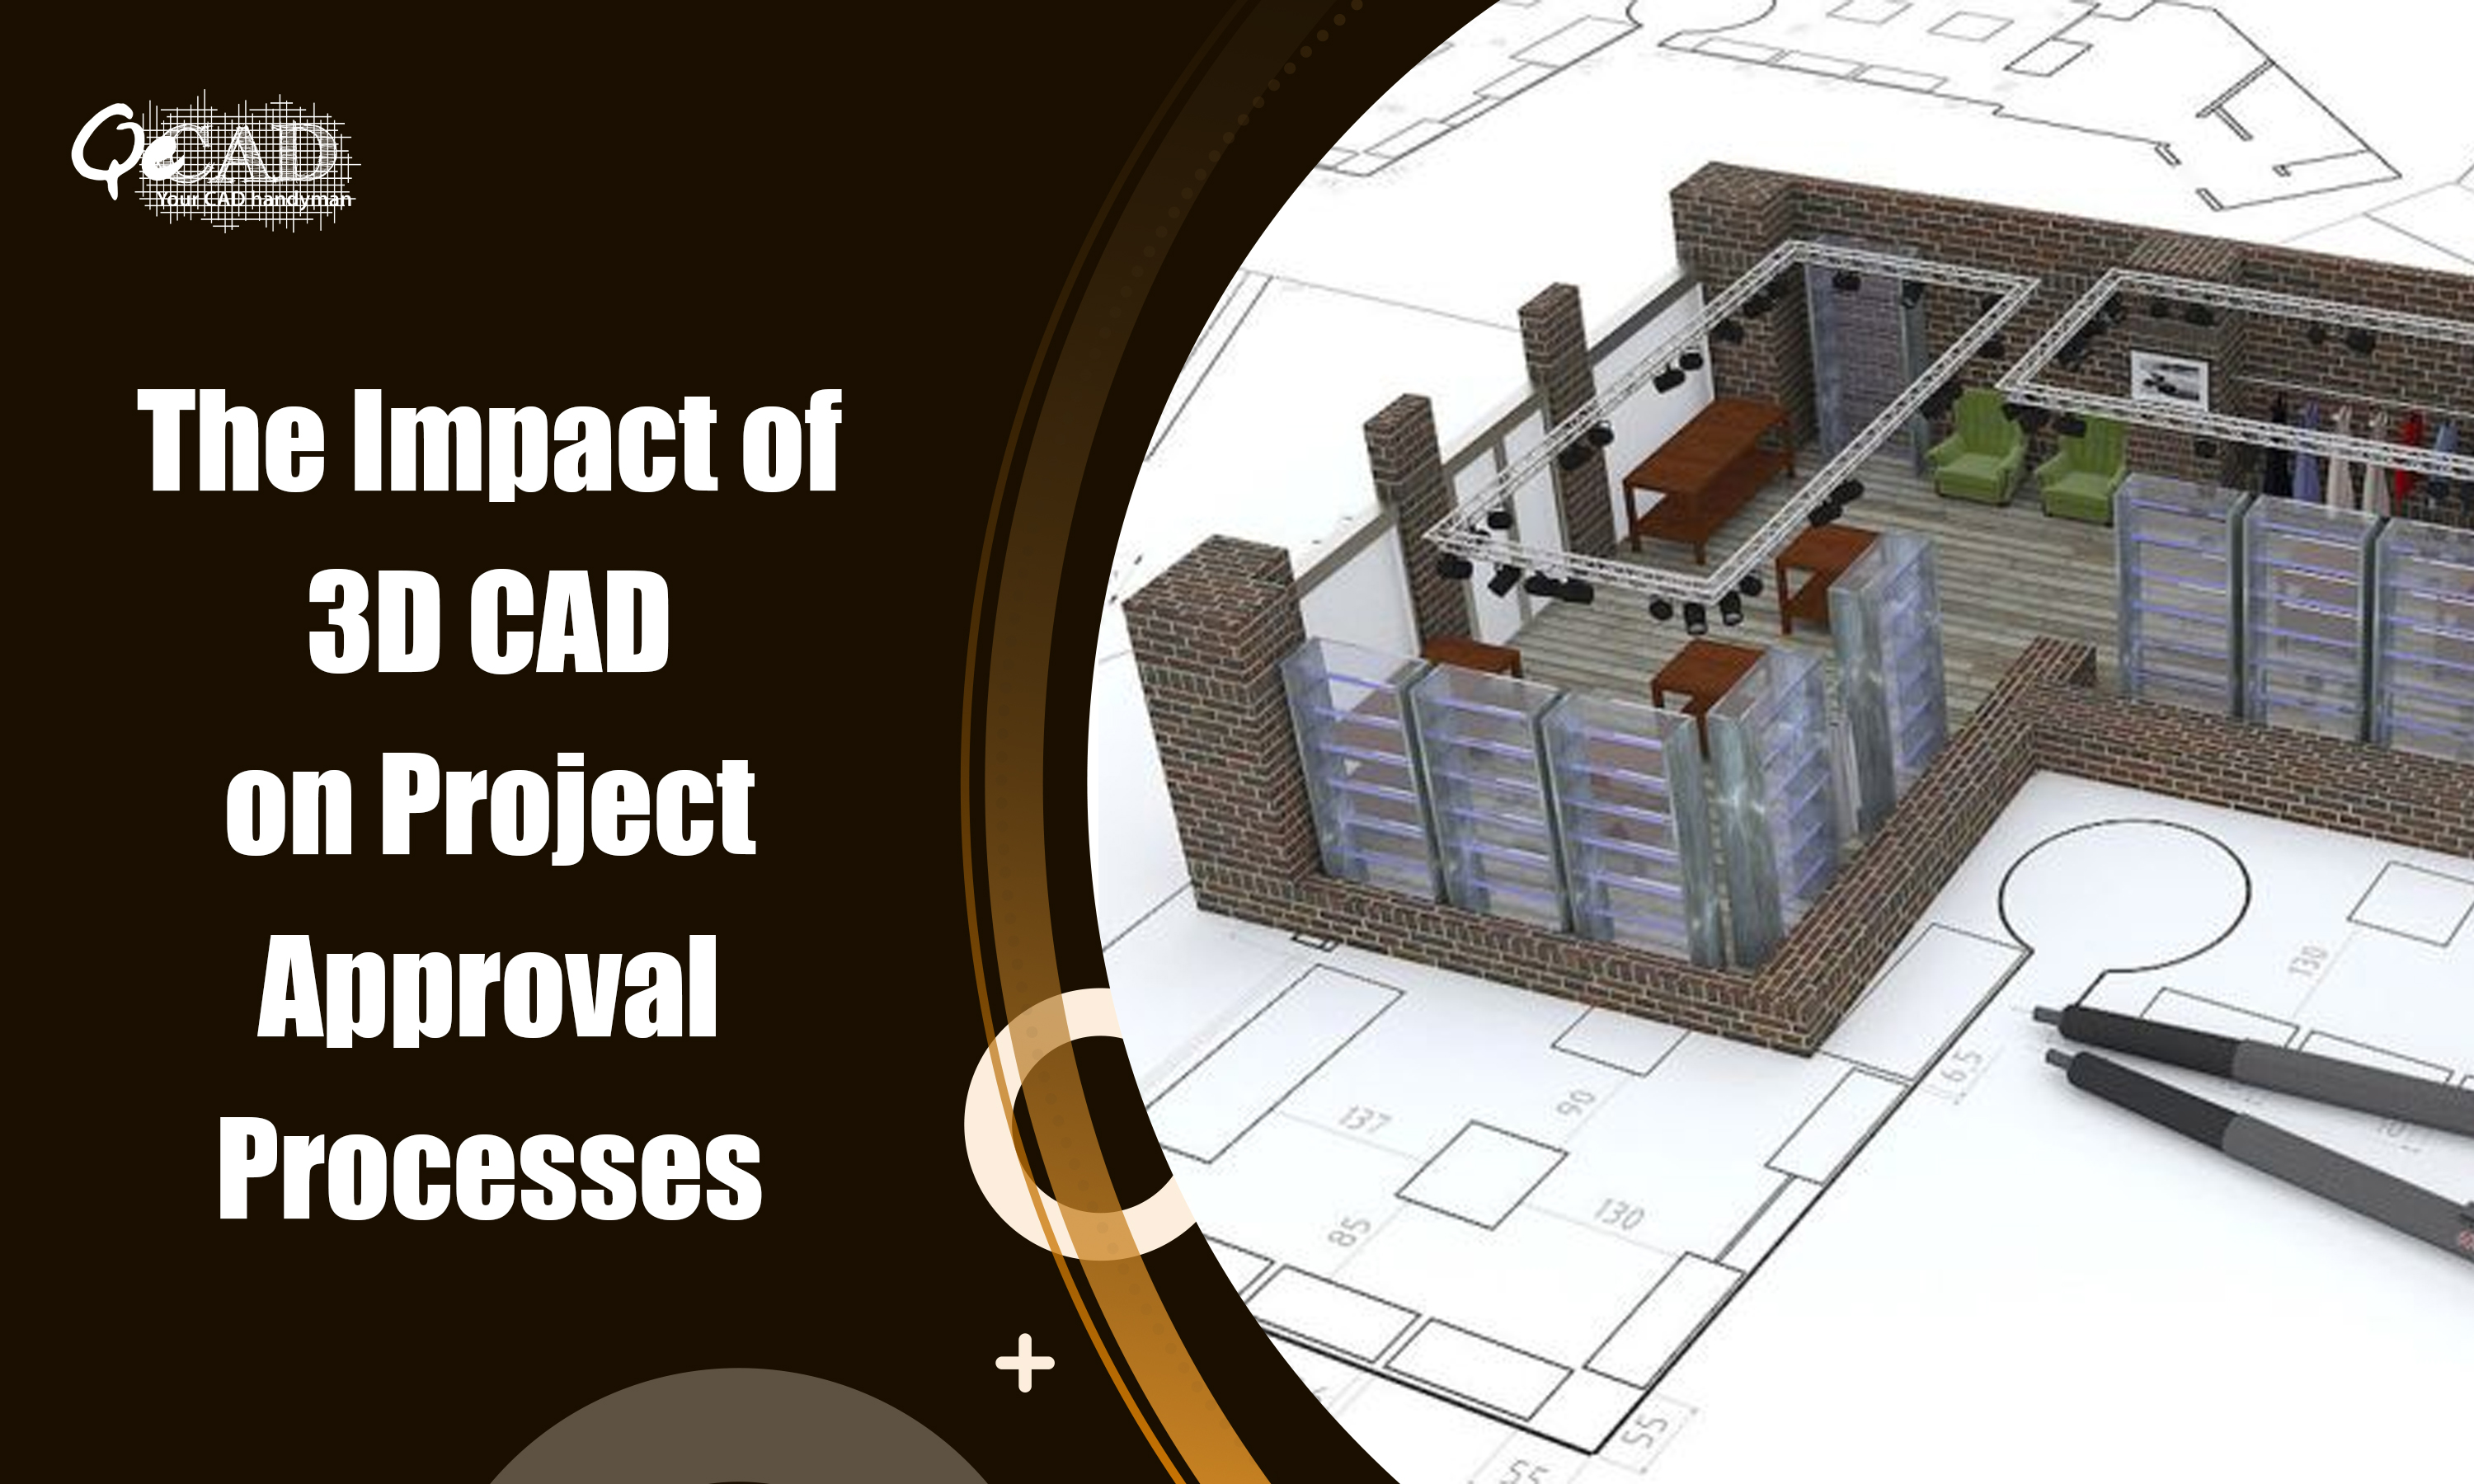 The Impact of 3D CAD on Project Approval Processes